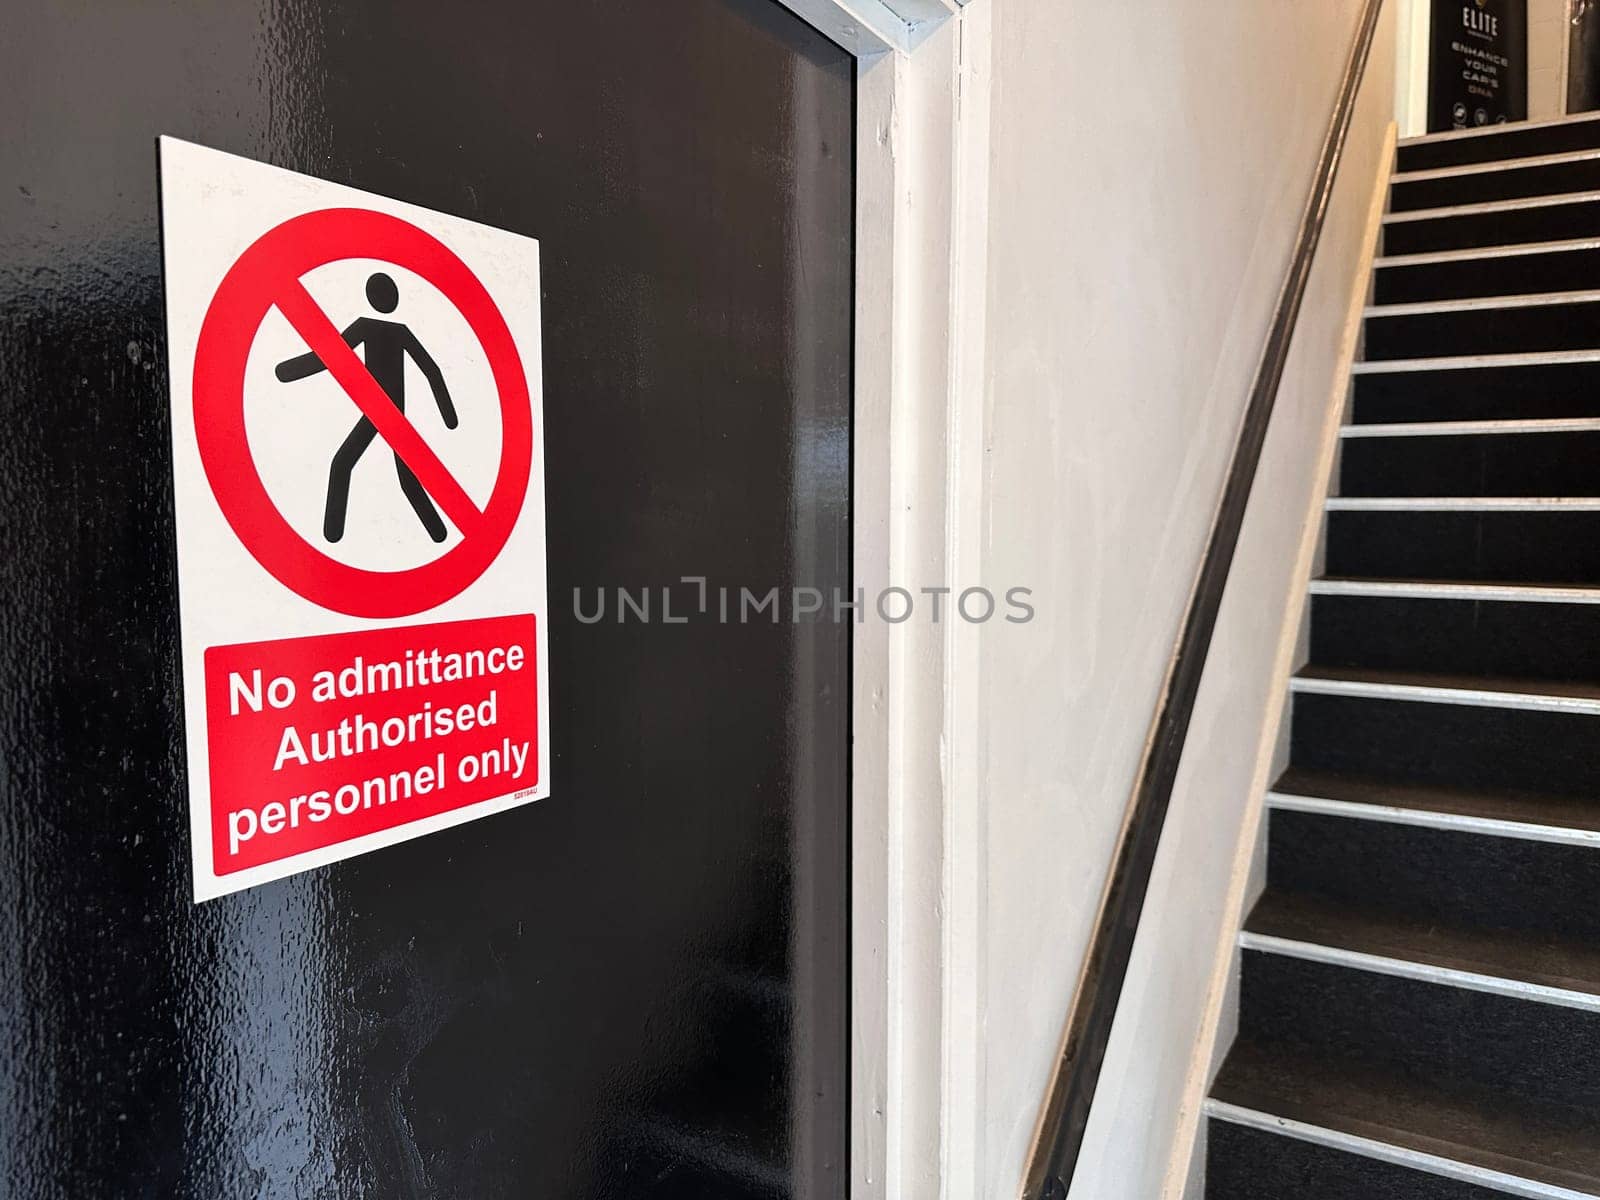 Authorised personnel only sign by MAD_Production